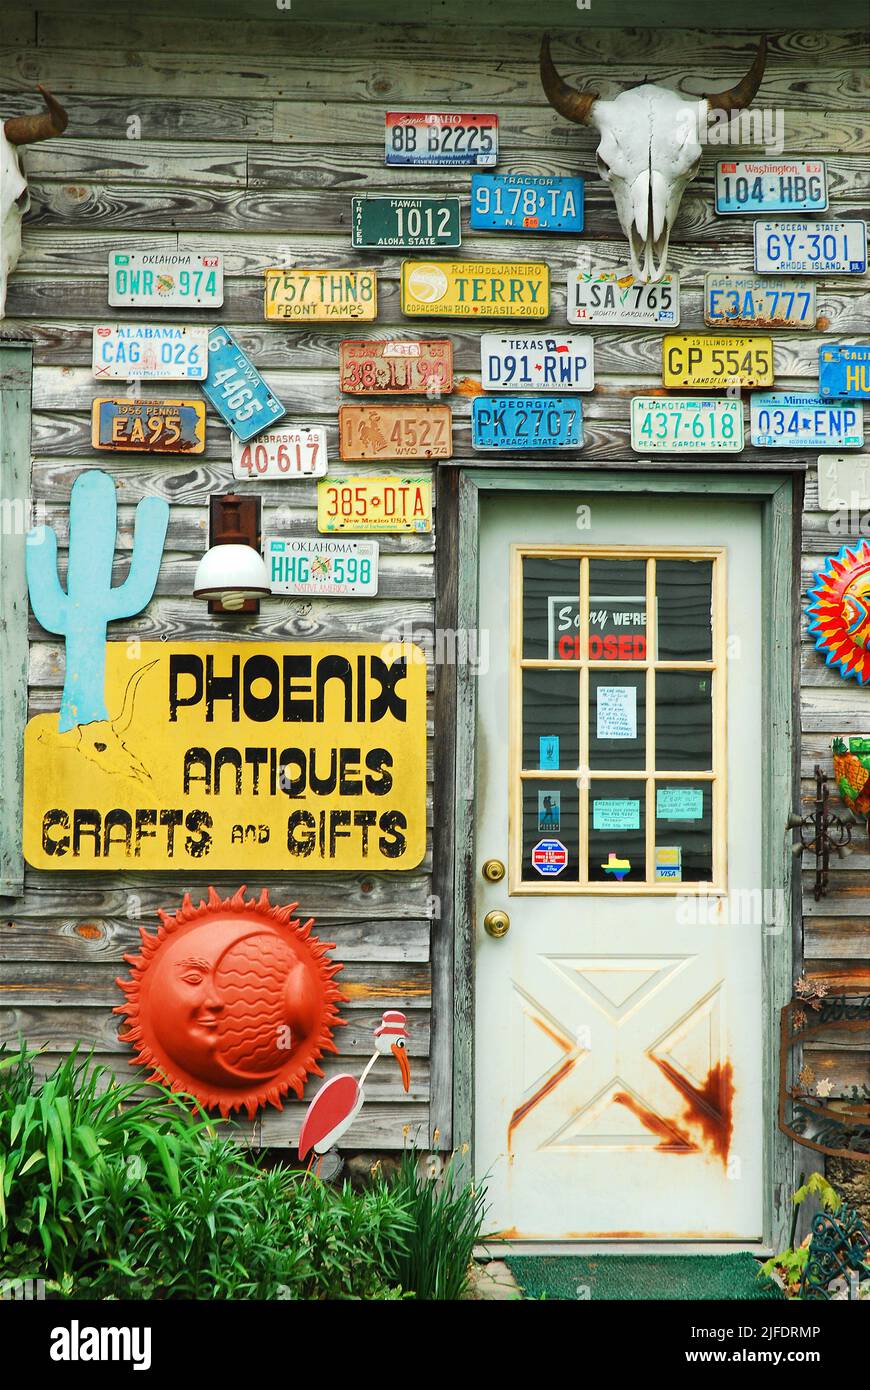 License plates from multiple states hang from the exterior wall of an antique, craft and gift shop store Stock Photo